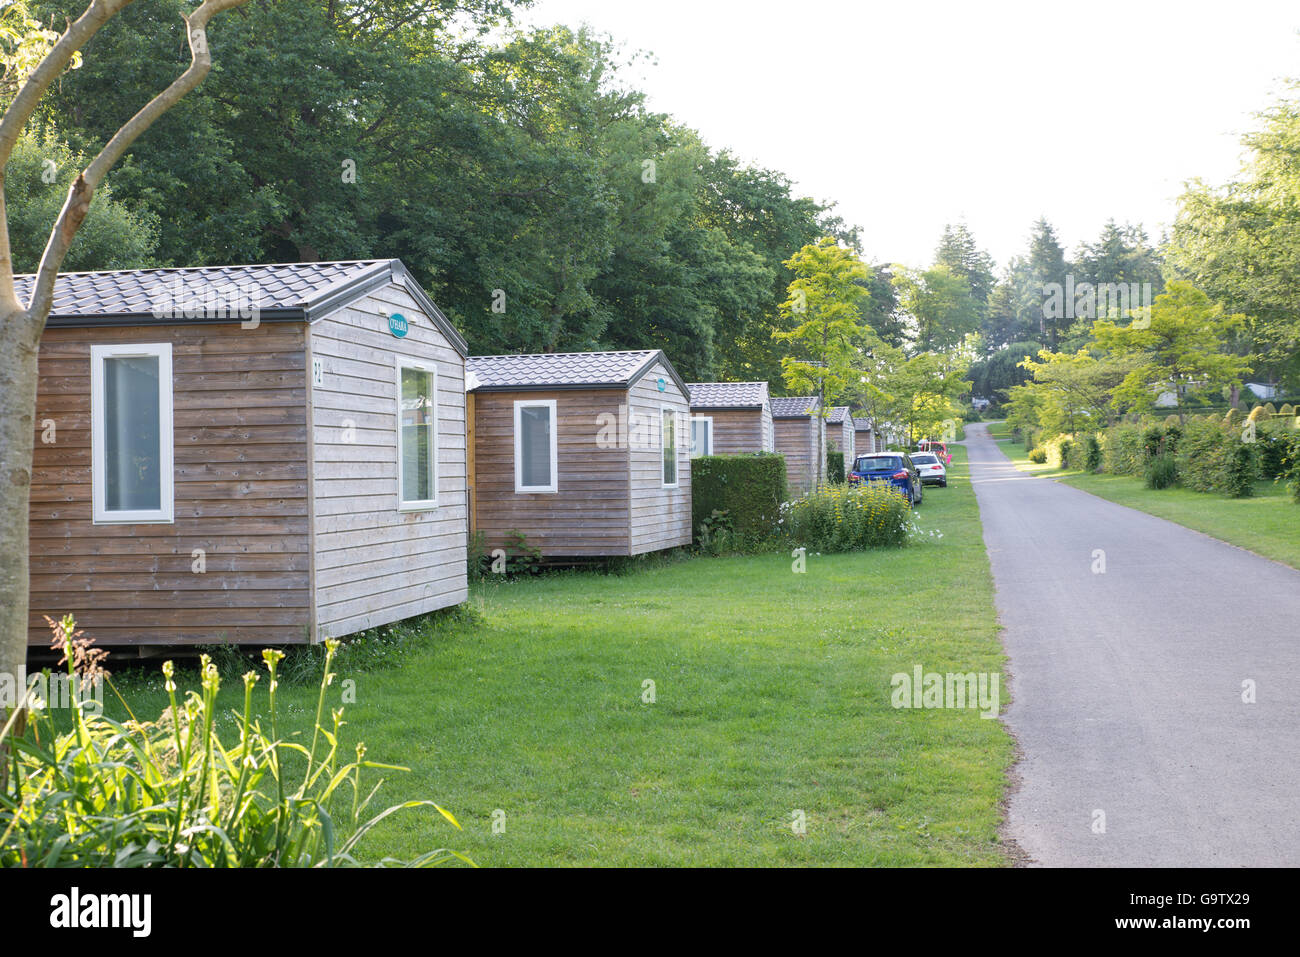 Mobile holiday homes at Domaine Des Ormes campsite in Dol De Bretagne, Brittany France Stock Photo